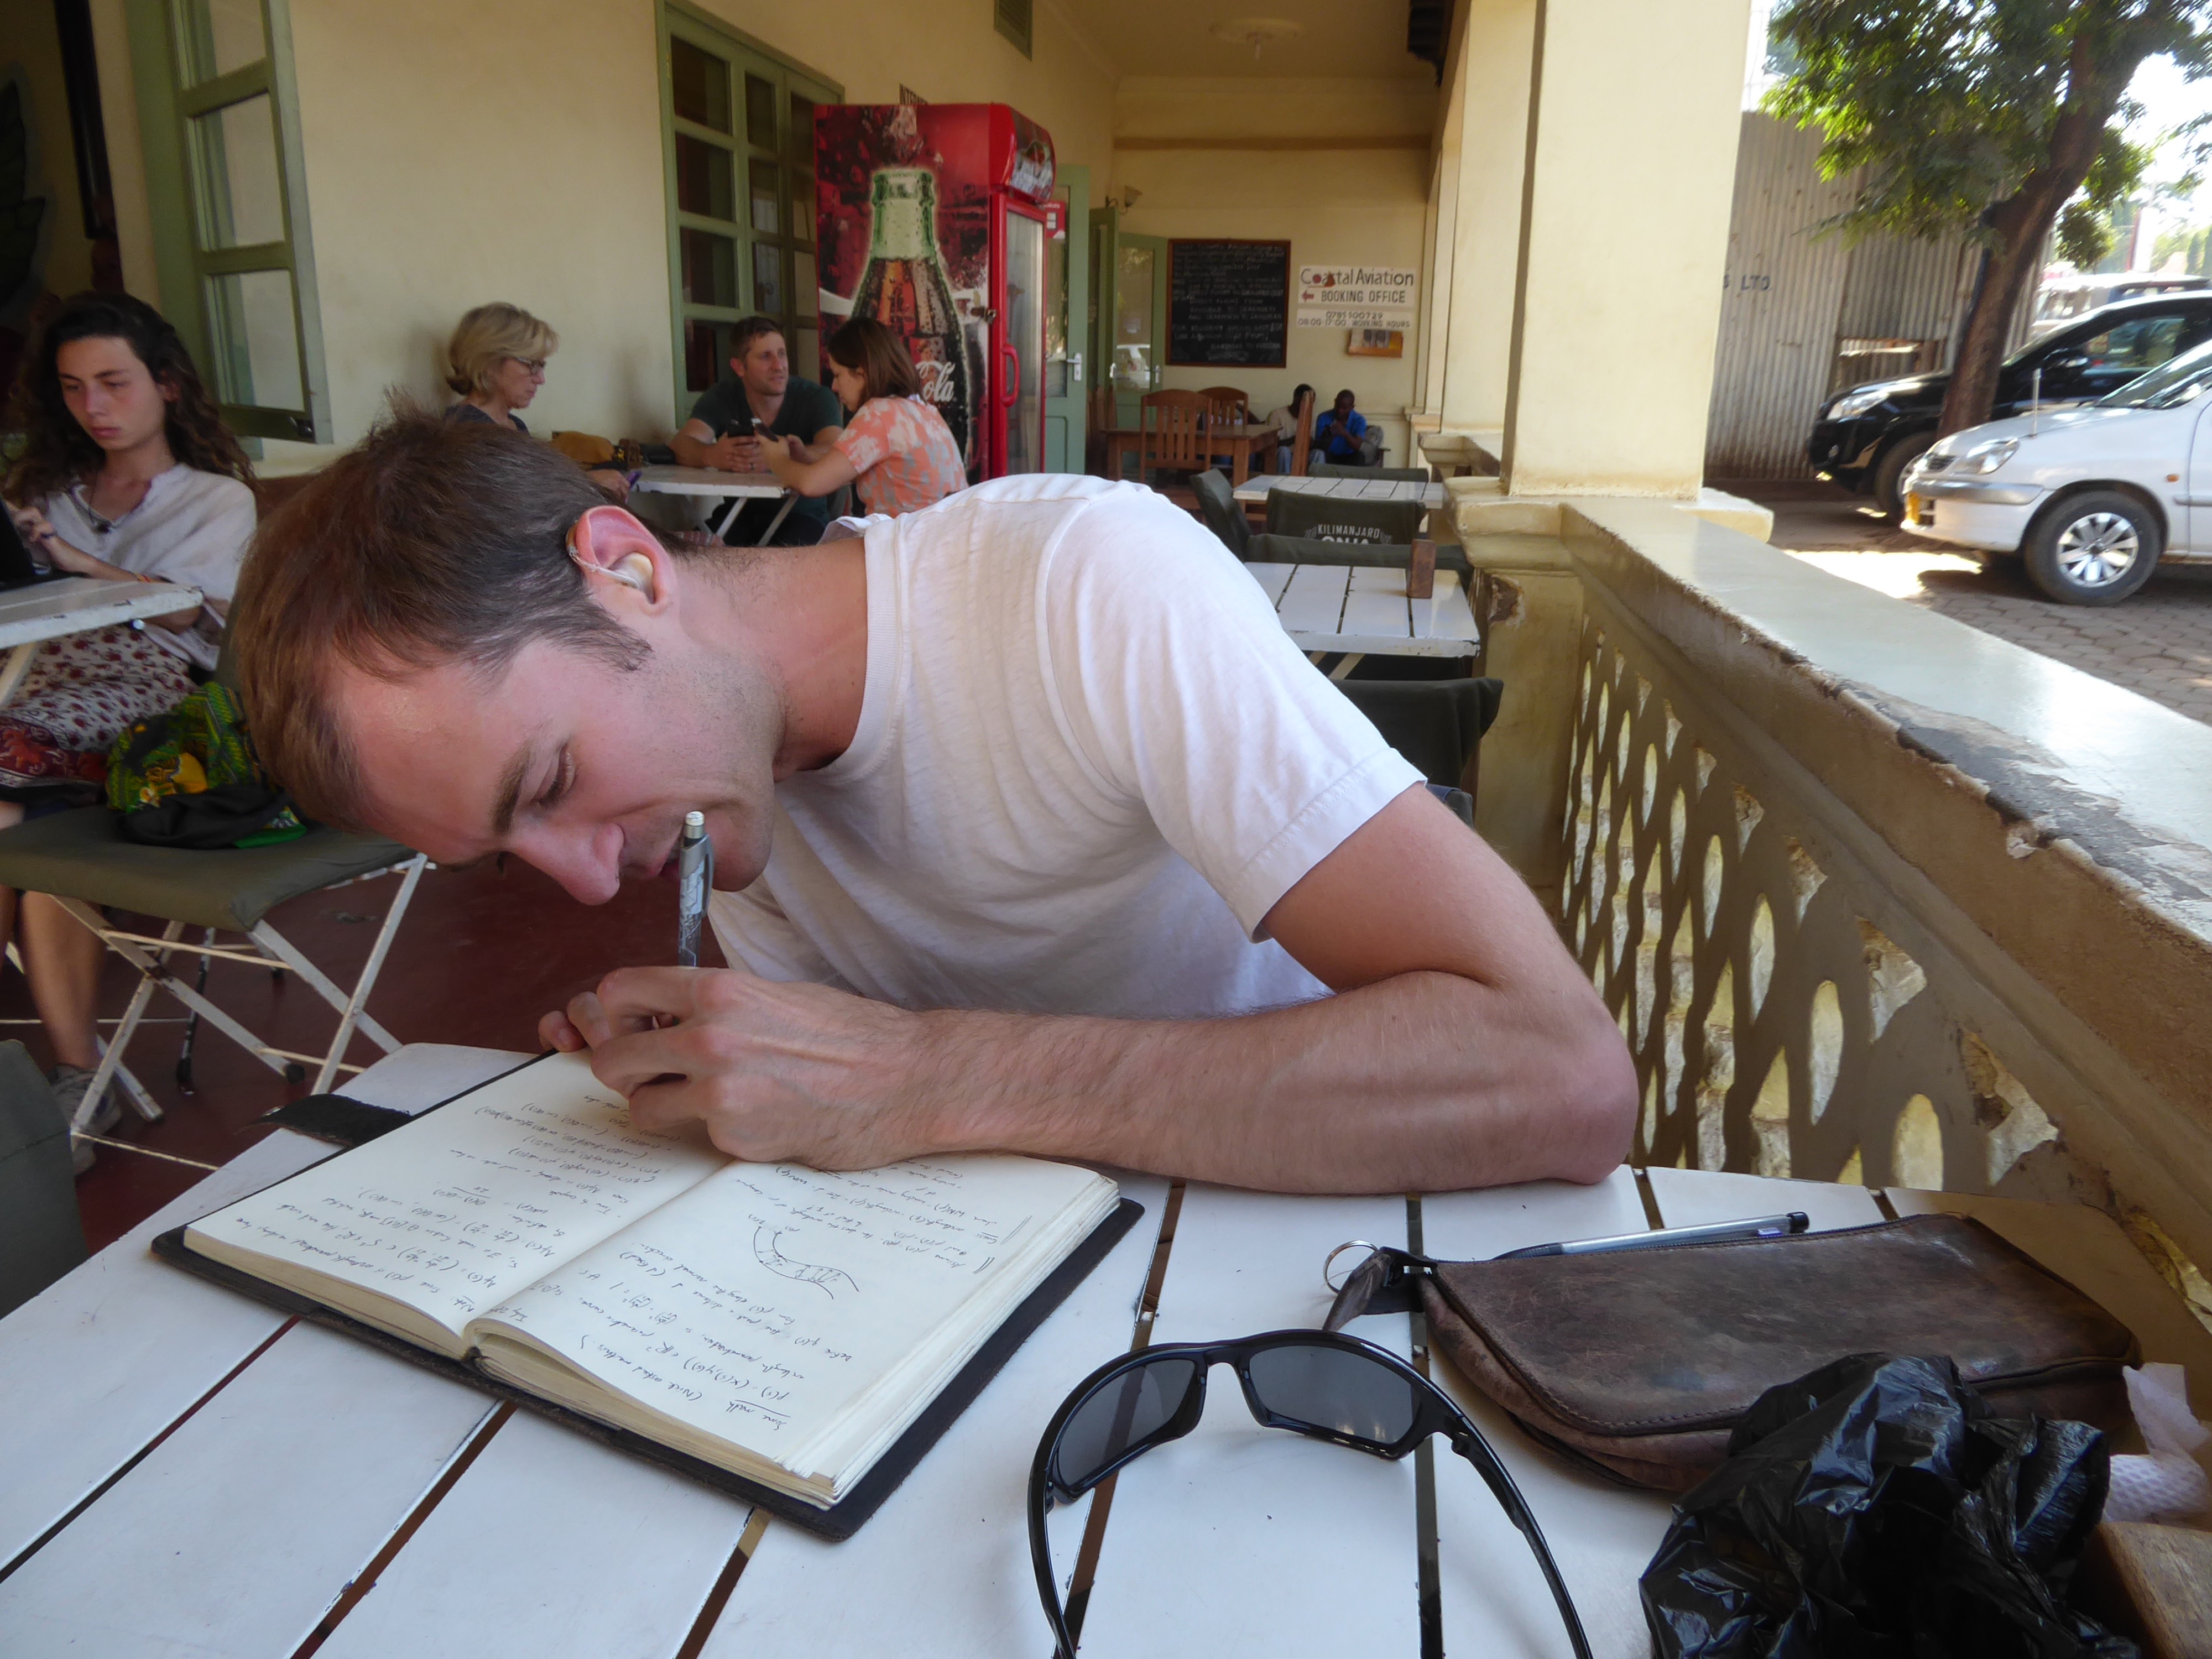 Left: Jake sketching ideas in a cafe in Moshi. Right: how we spent the rest of our time.